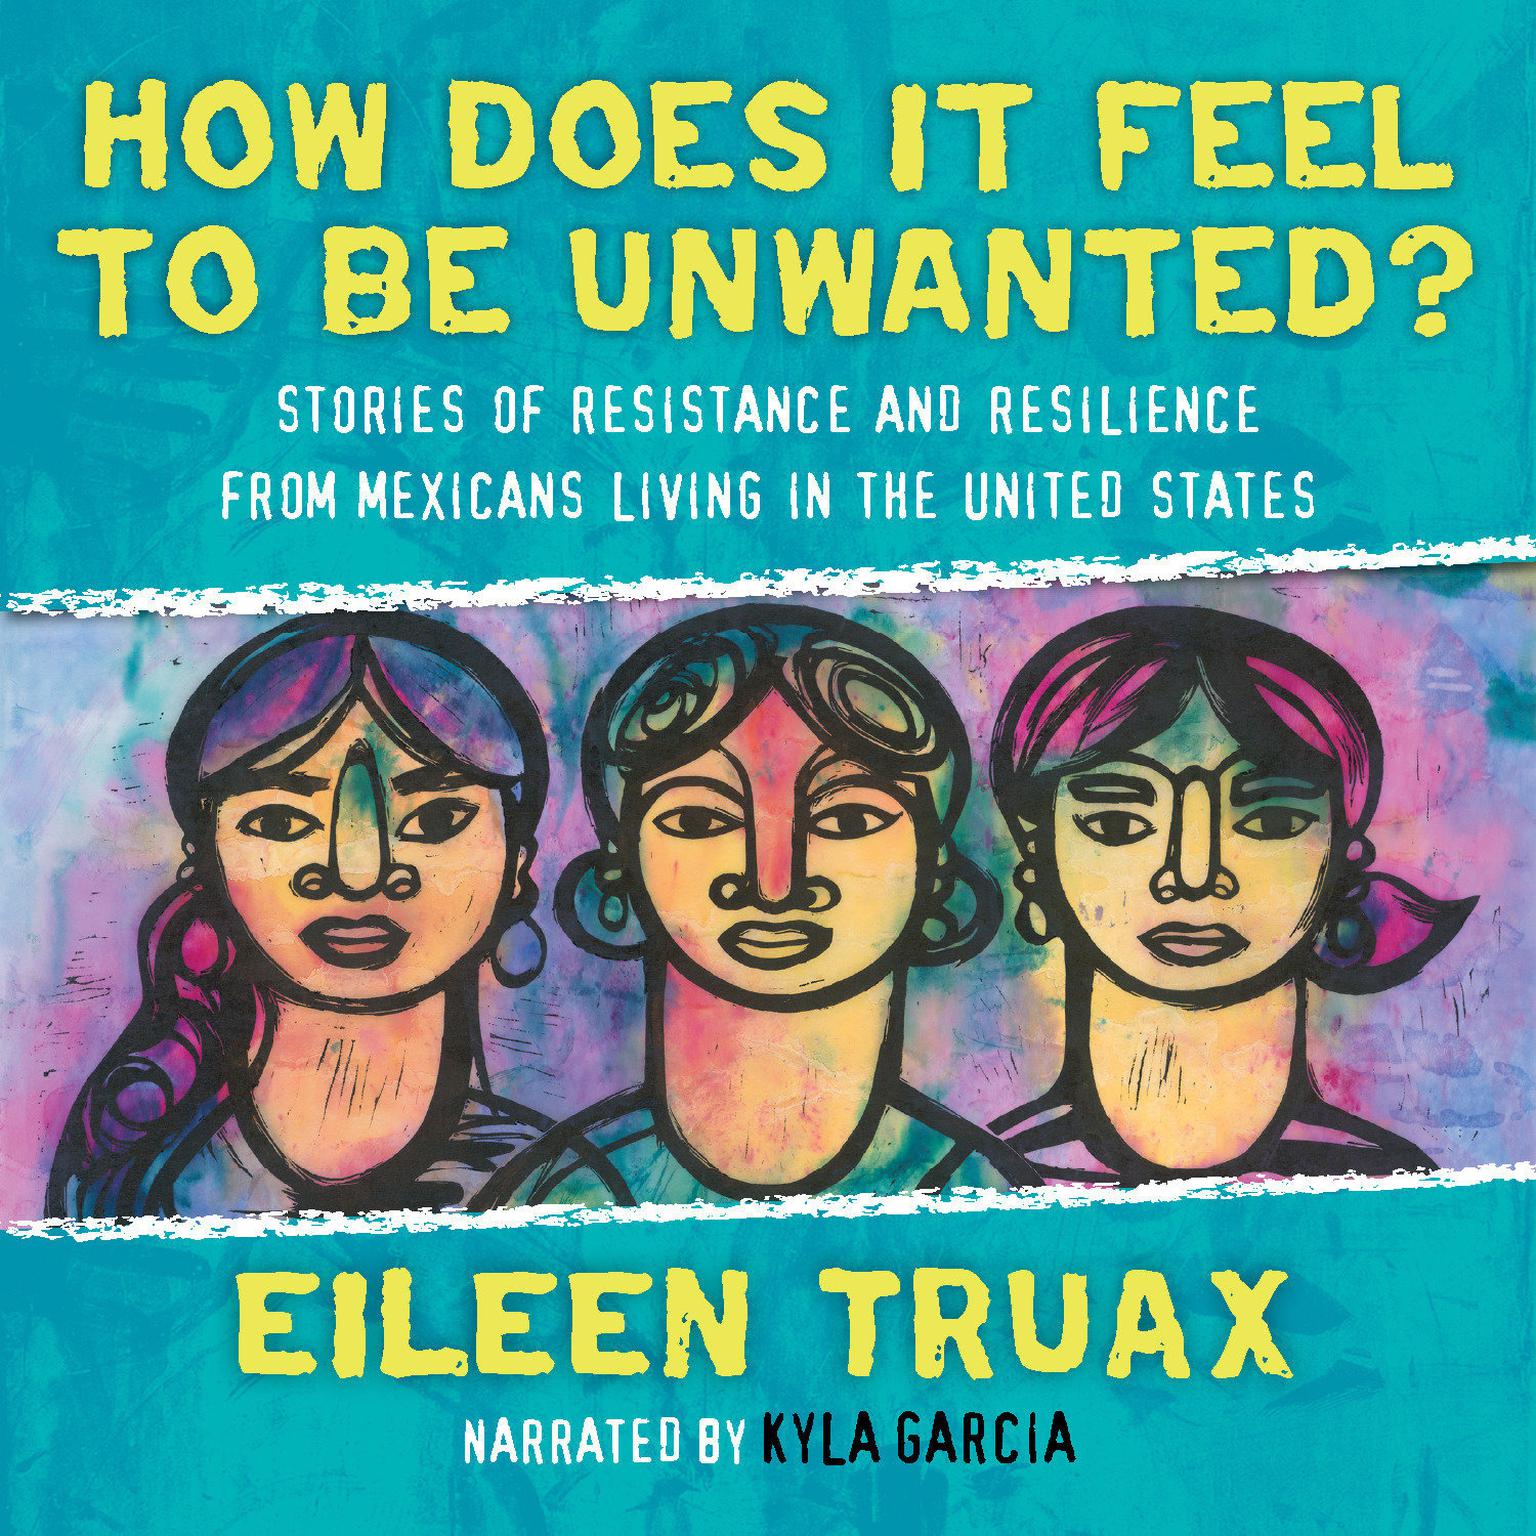 How Does It Feel to Be Unwanted?: Stories of Resistance and Resilience from Mexicans Living in the United States Audiobook, by Eileen Truax